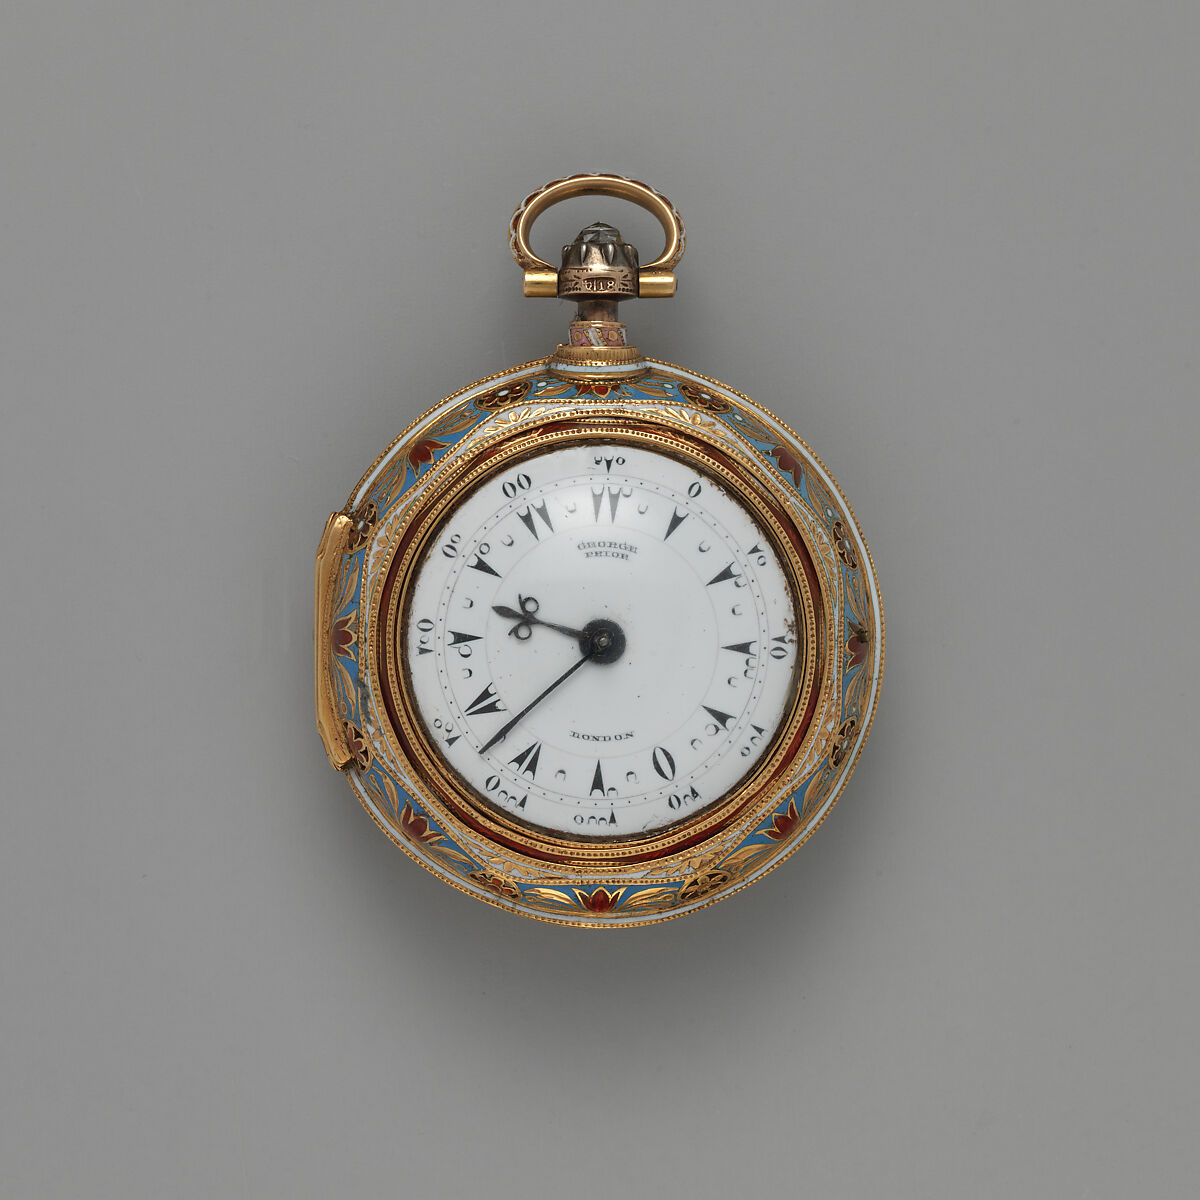 Repeating watch, Watchmaker: George Prior (active 1800–1830), Gold, enamel, British, London 